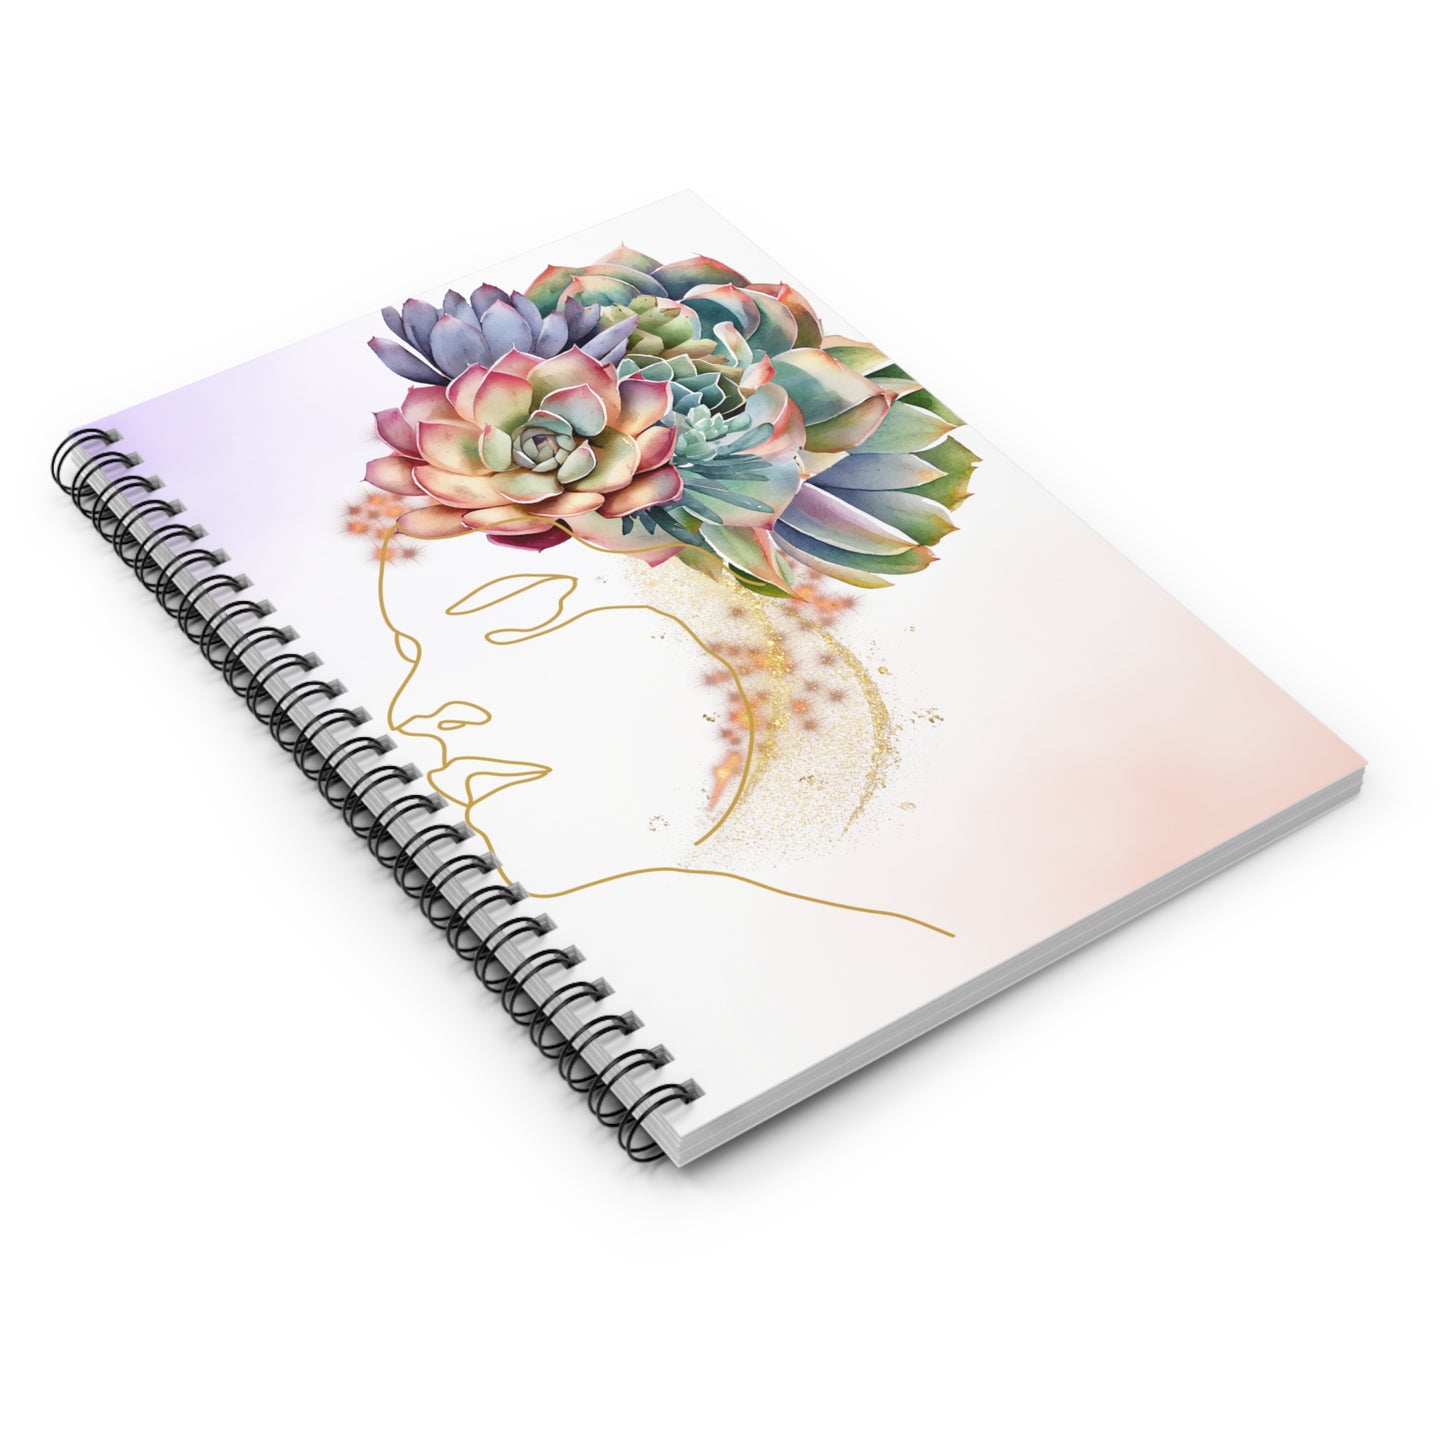 Succulent Love: Spiral Notebook - Log Books - Journals - Diaries - and More Custom Printed by TheGlassyLass.com